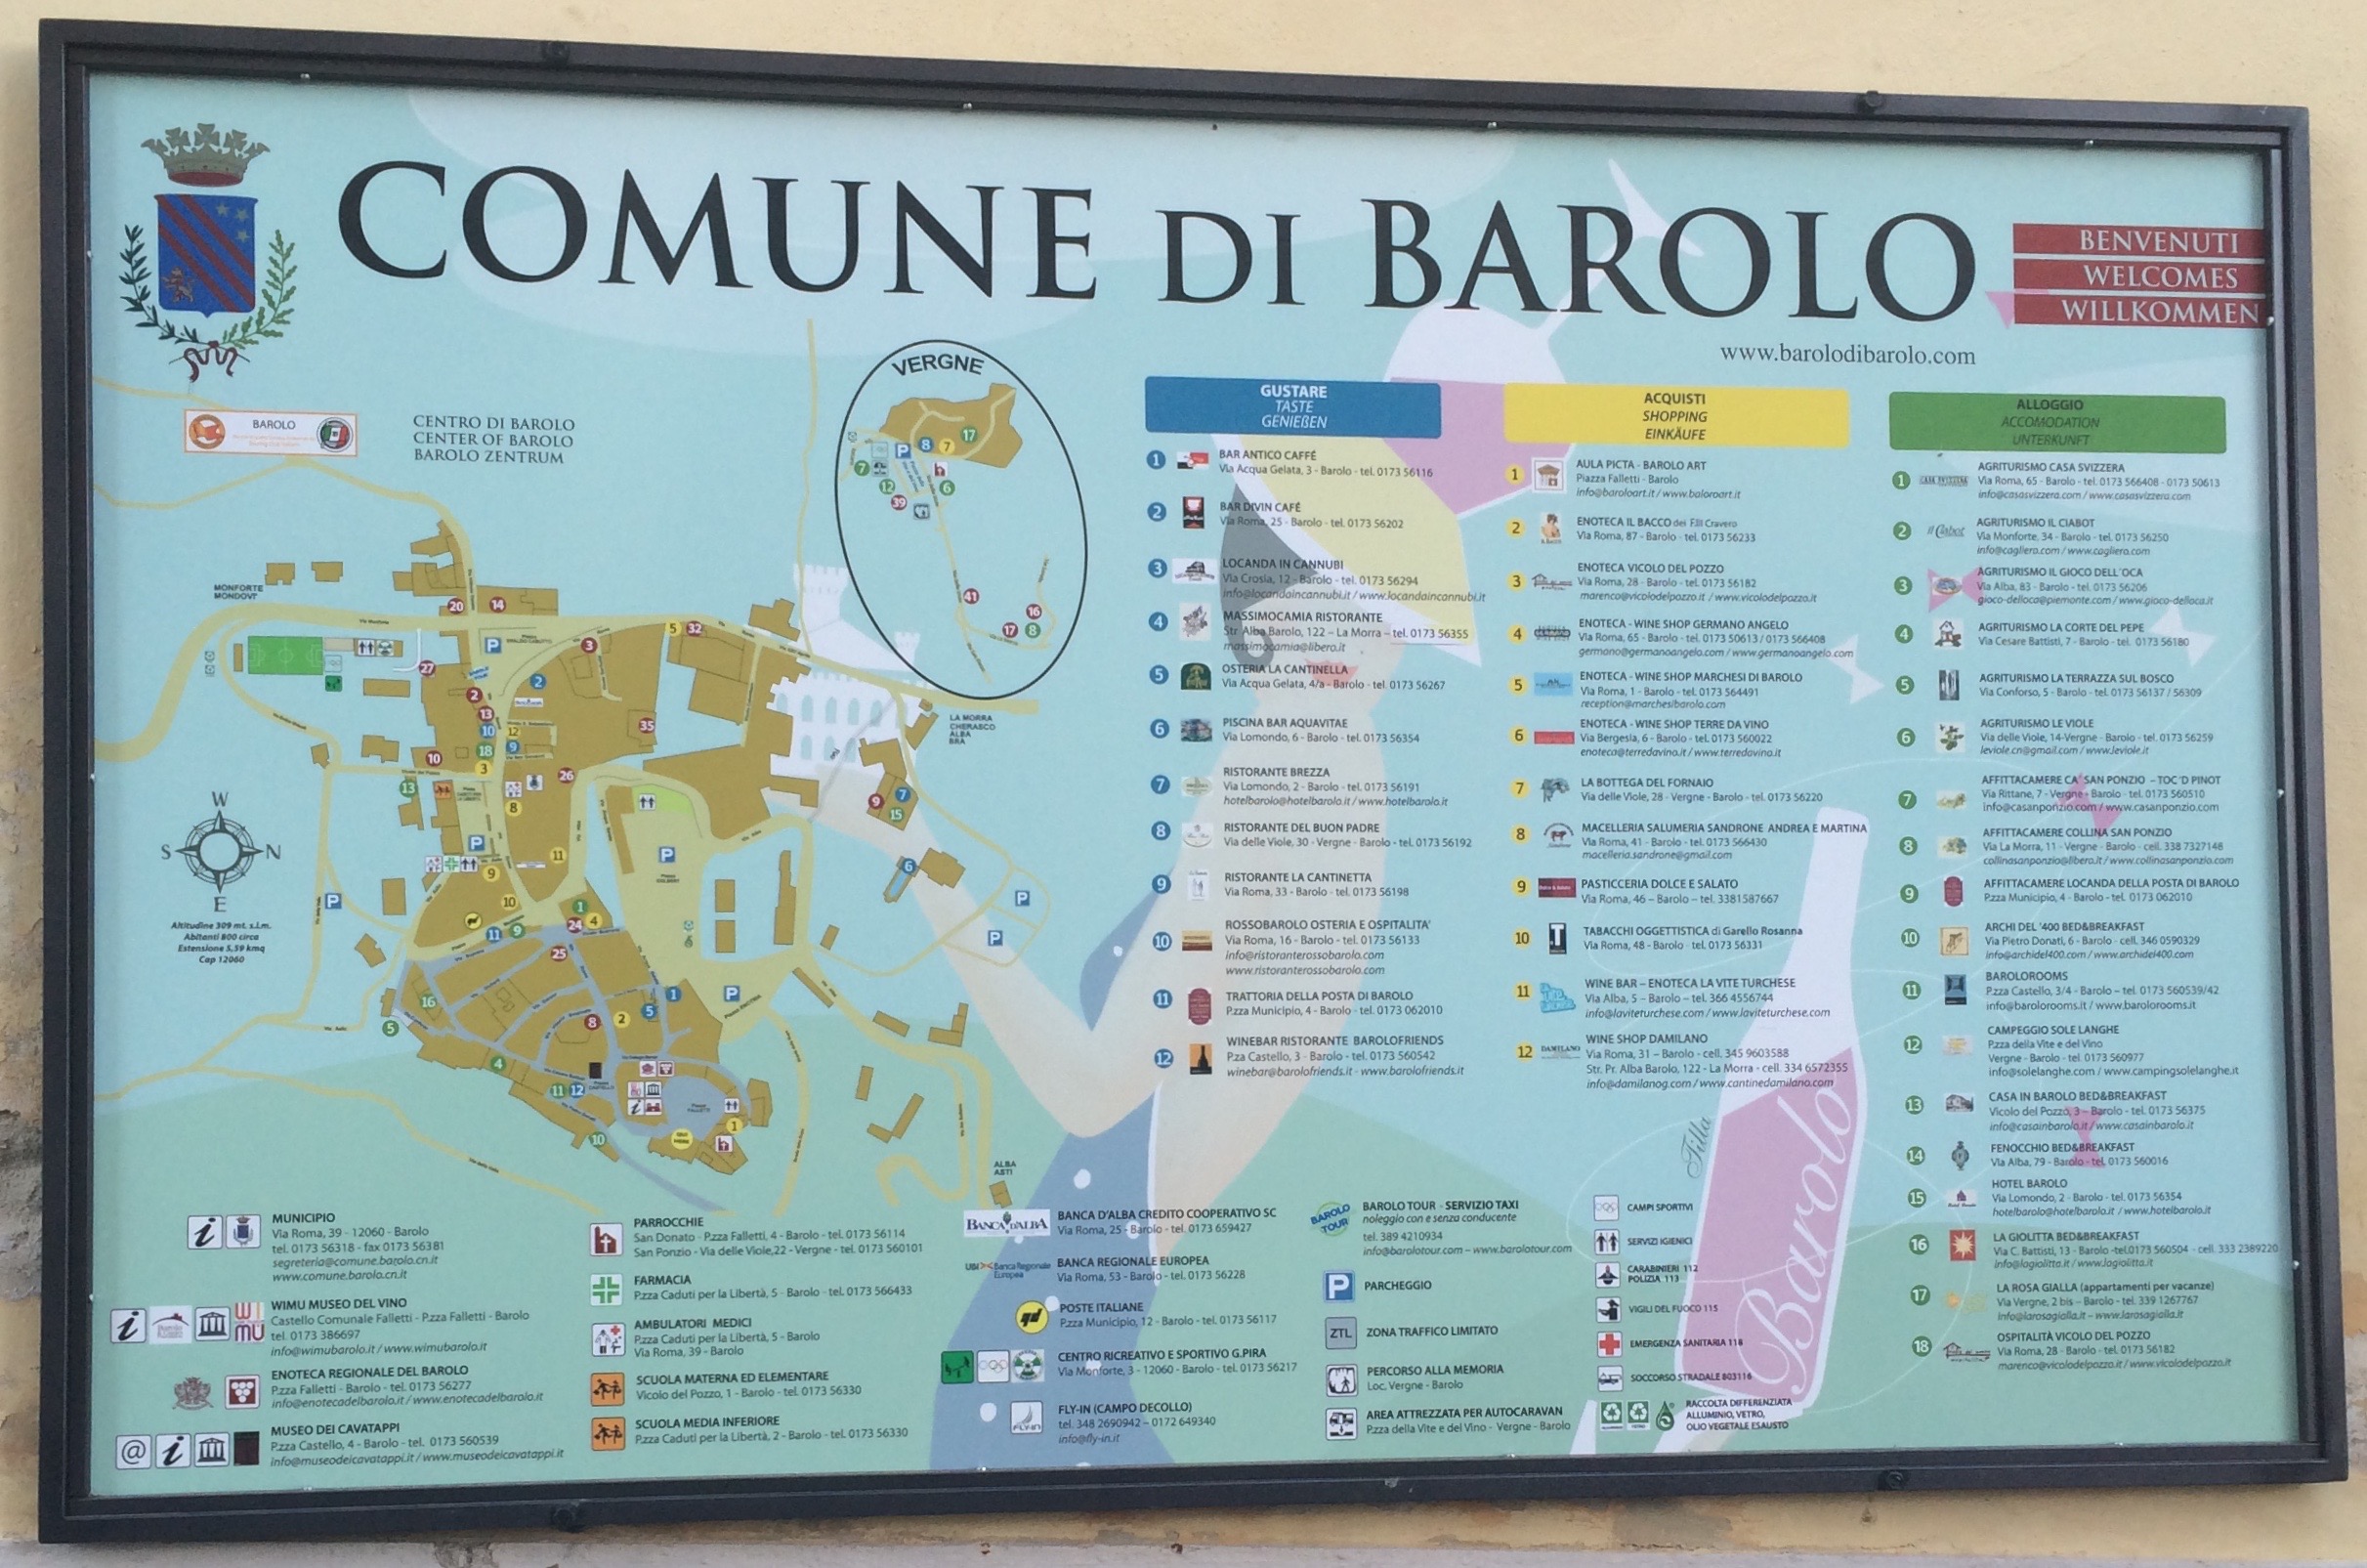 Map of hotels, restaurants and - importatnly - wine shops in Barolo.